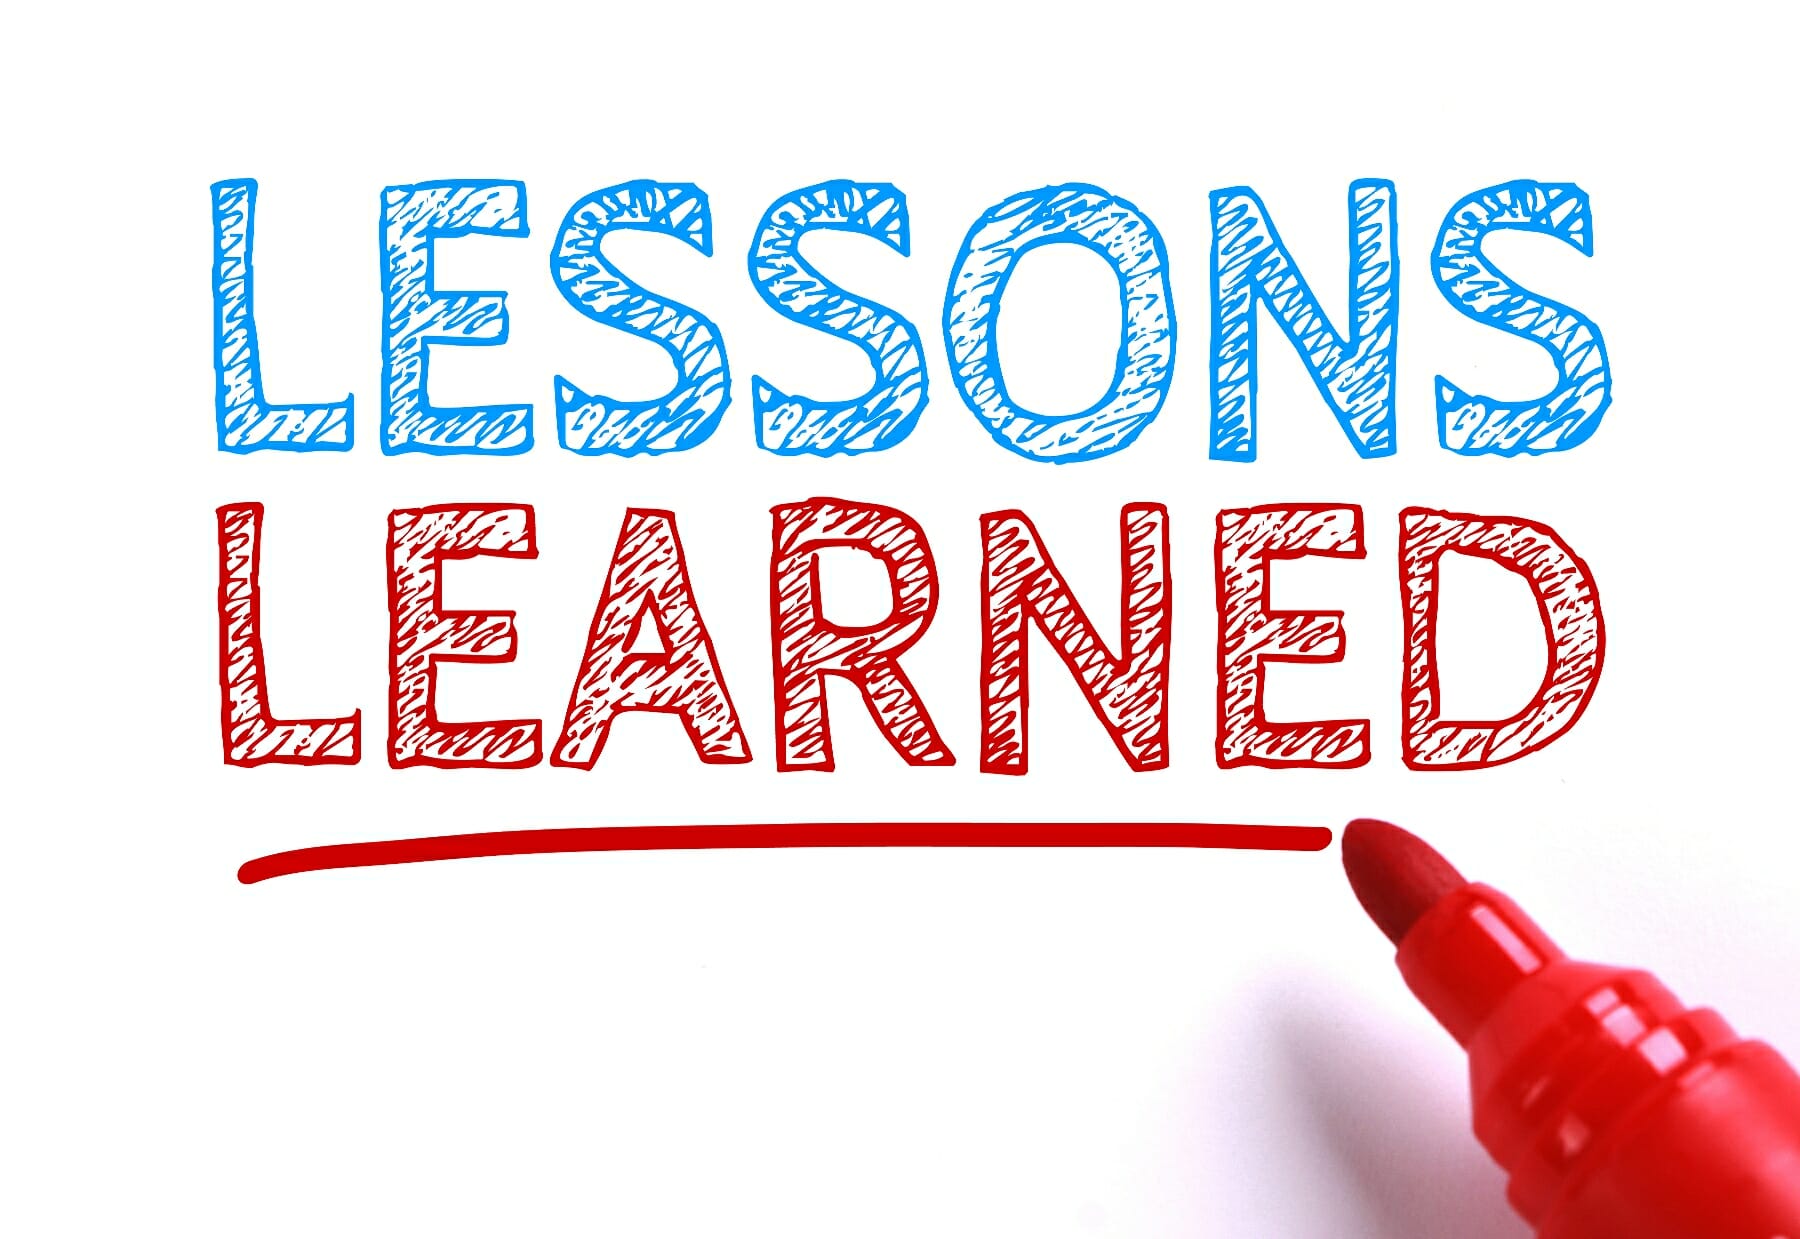 Four lessons learned for how to make good decisions - All the Way